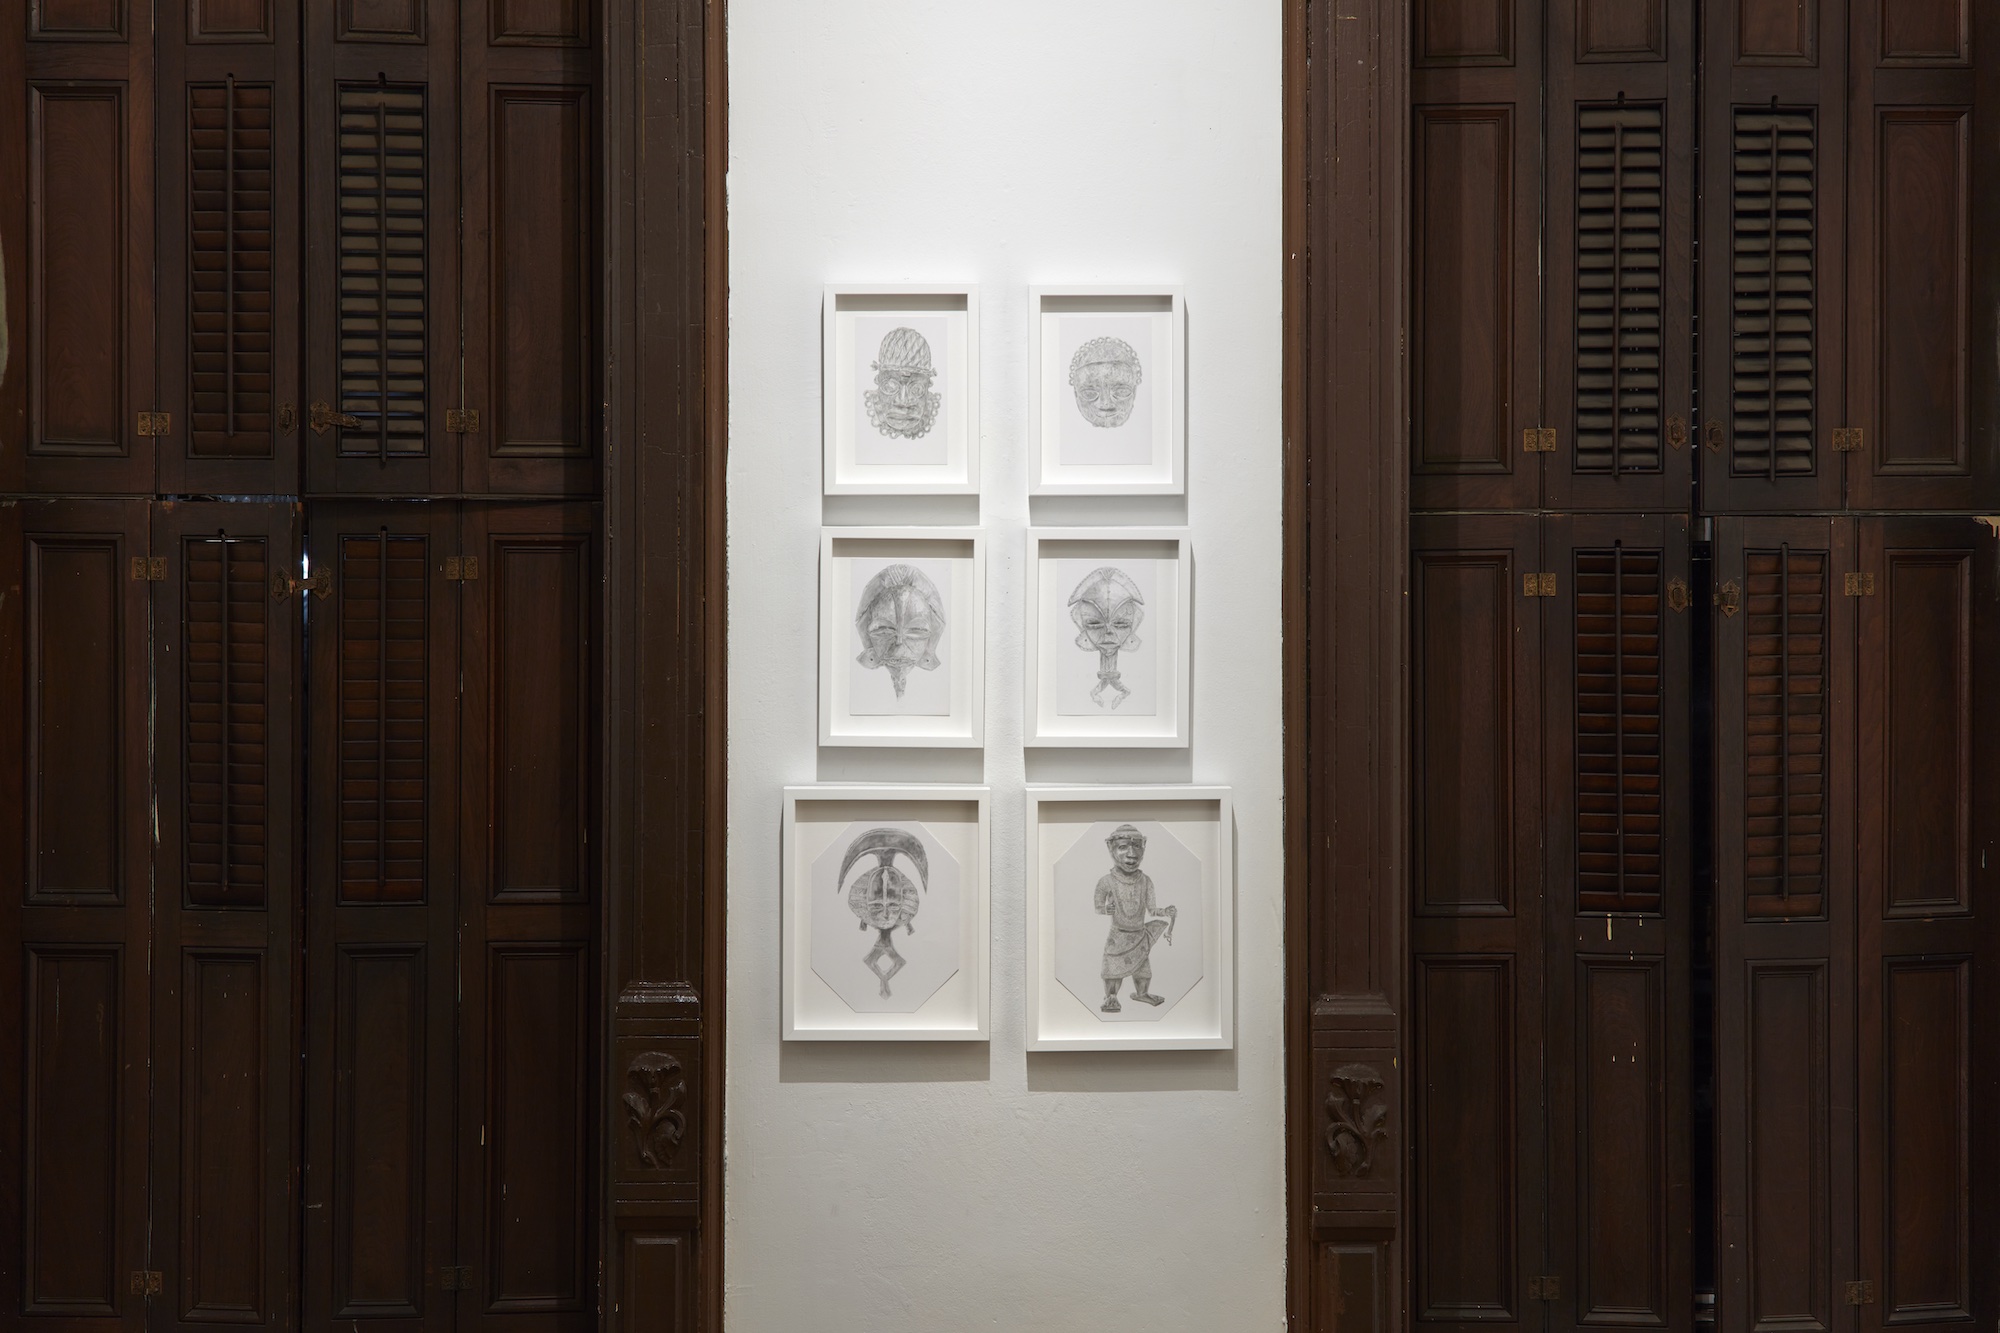 Image of drawings on the wall placed between two brown doors